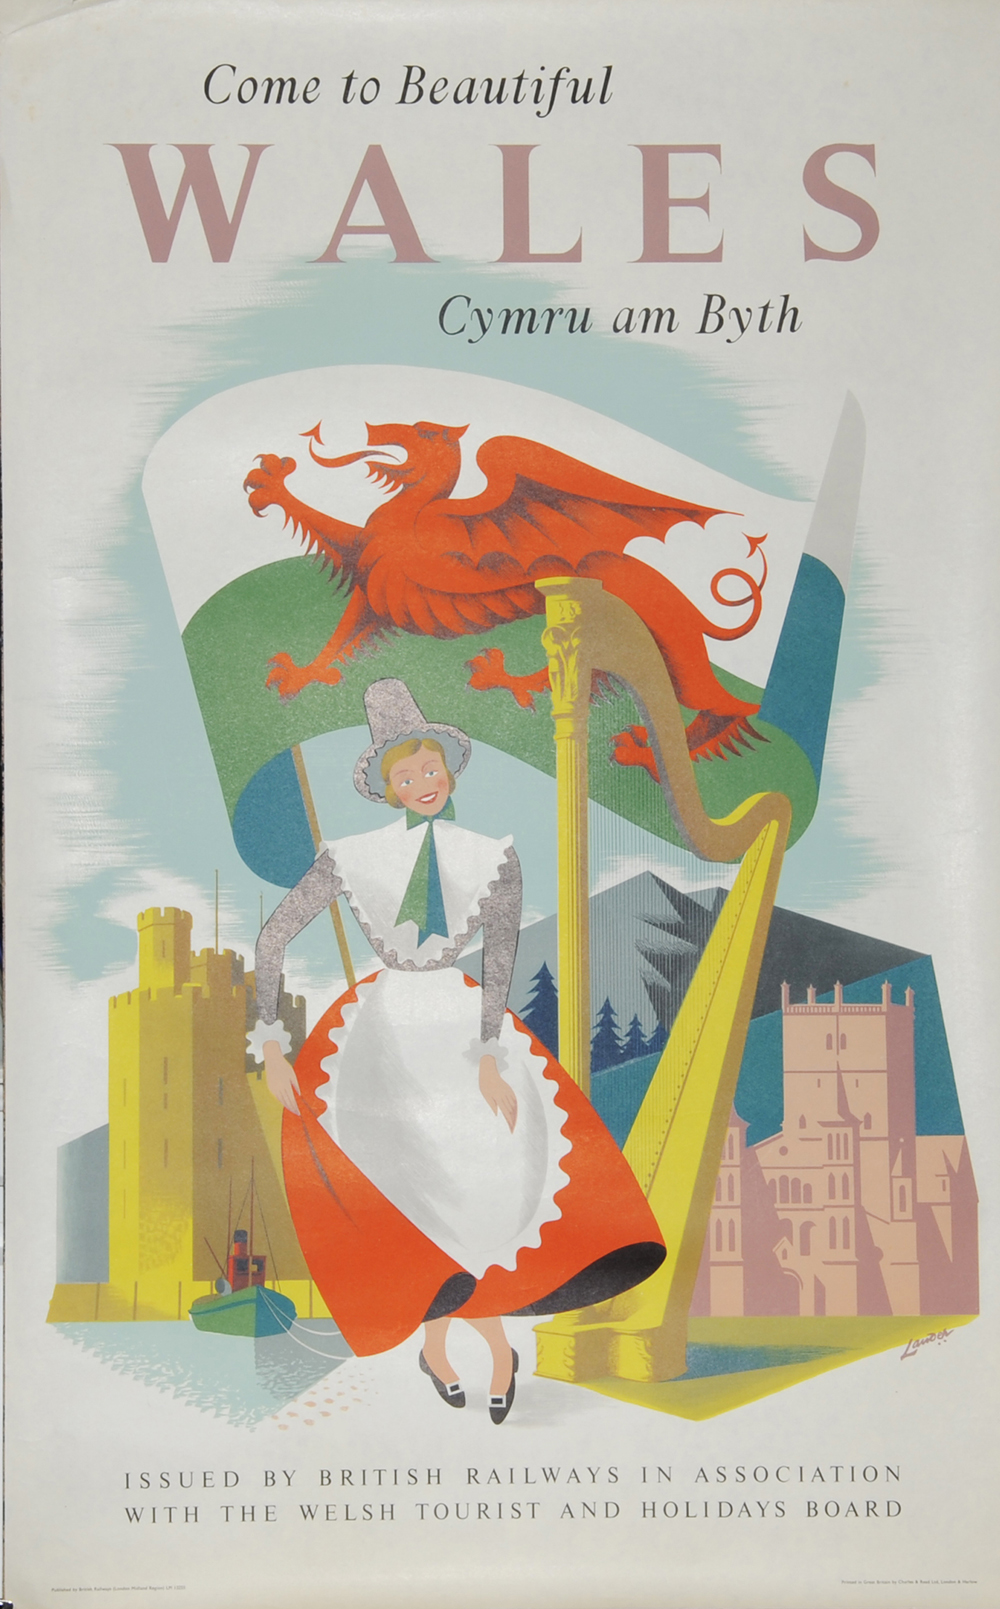 Poster, British Railways 'Come to Beautiful Wales - Cymru Ambyth' by Lander, D/R size. Depicts the Welsh National Flag with traditional costumed lady beside a harp and between St David's Cathedral and Caernarvon Castle. Published by British Railways London Midland Region and printed by Charles & Read 